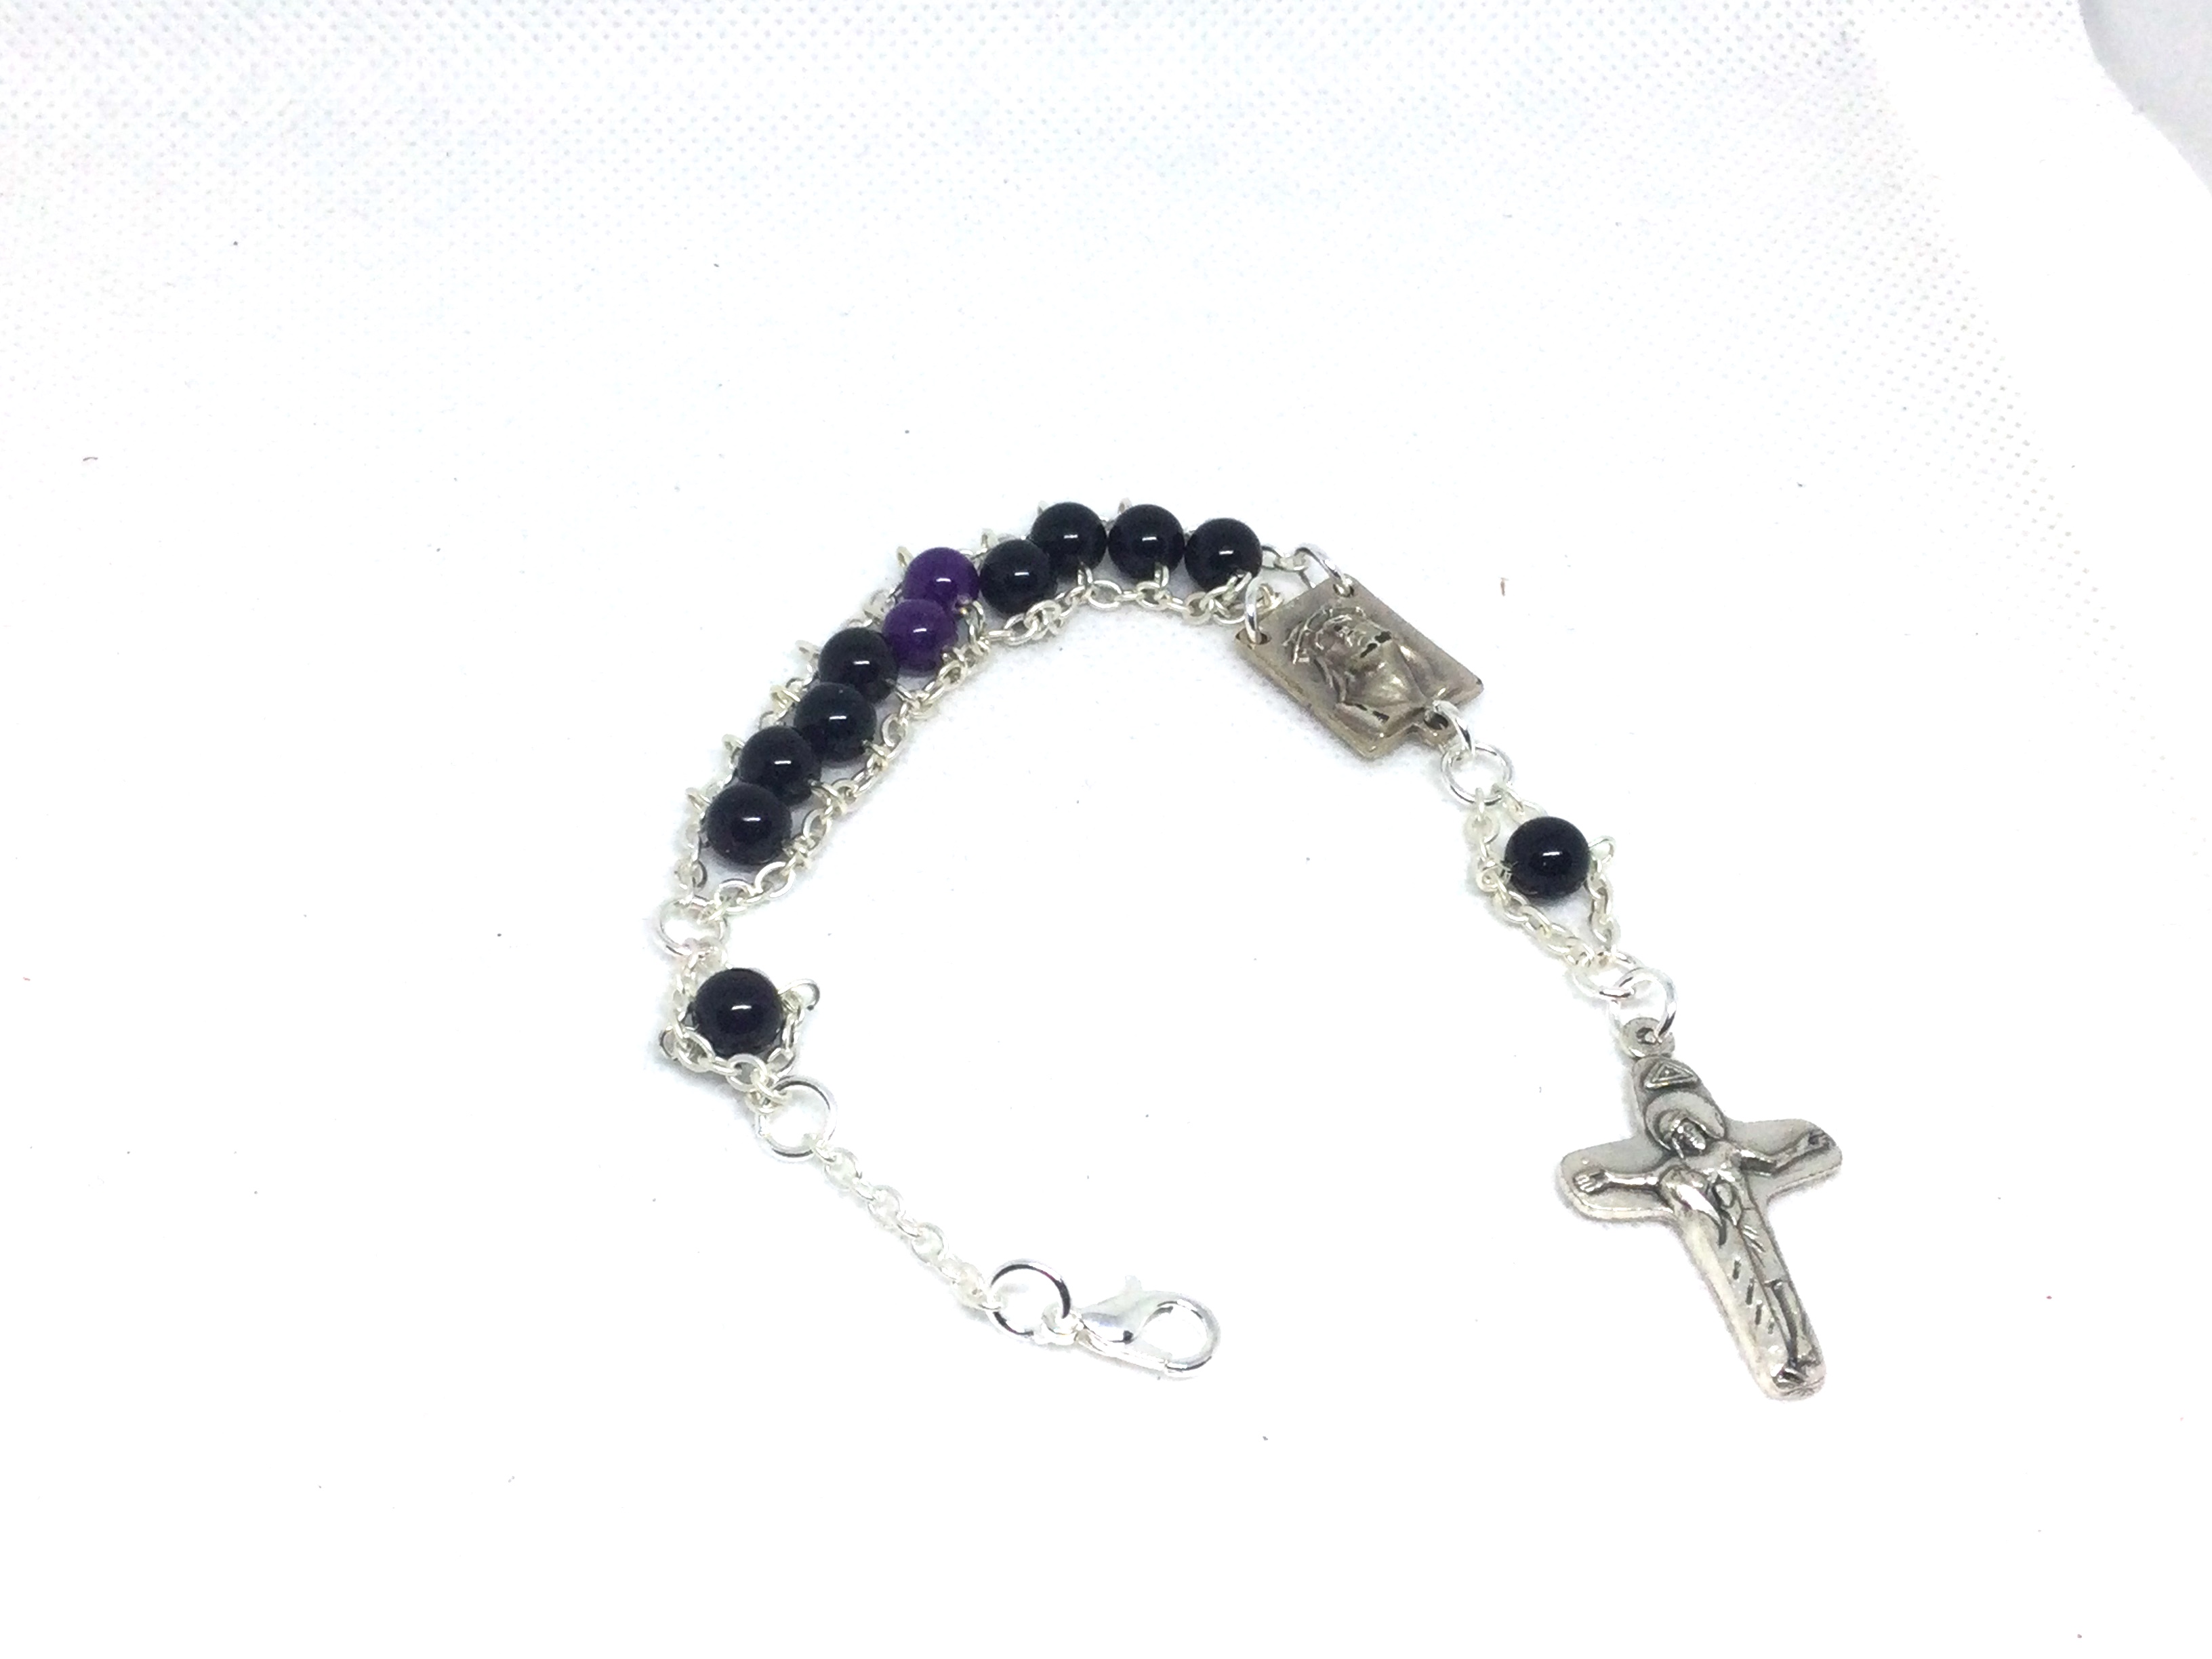 Praying with the Holy Rosary - Beautiful Handmade Rosary Bracelets